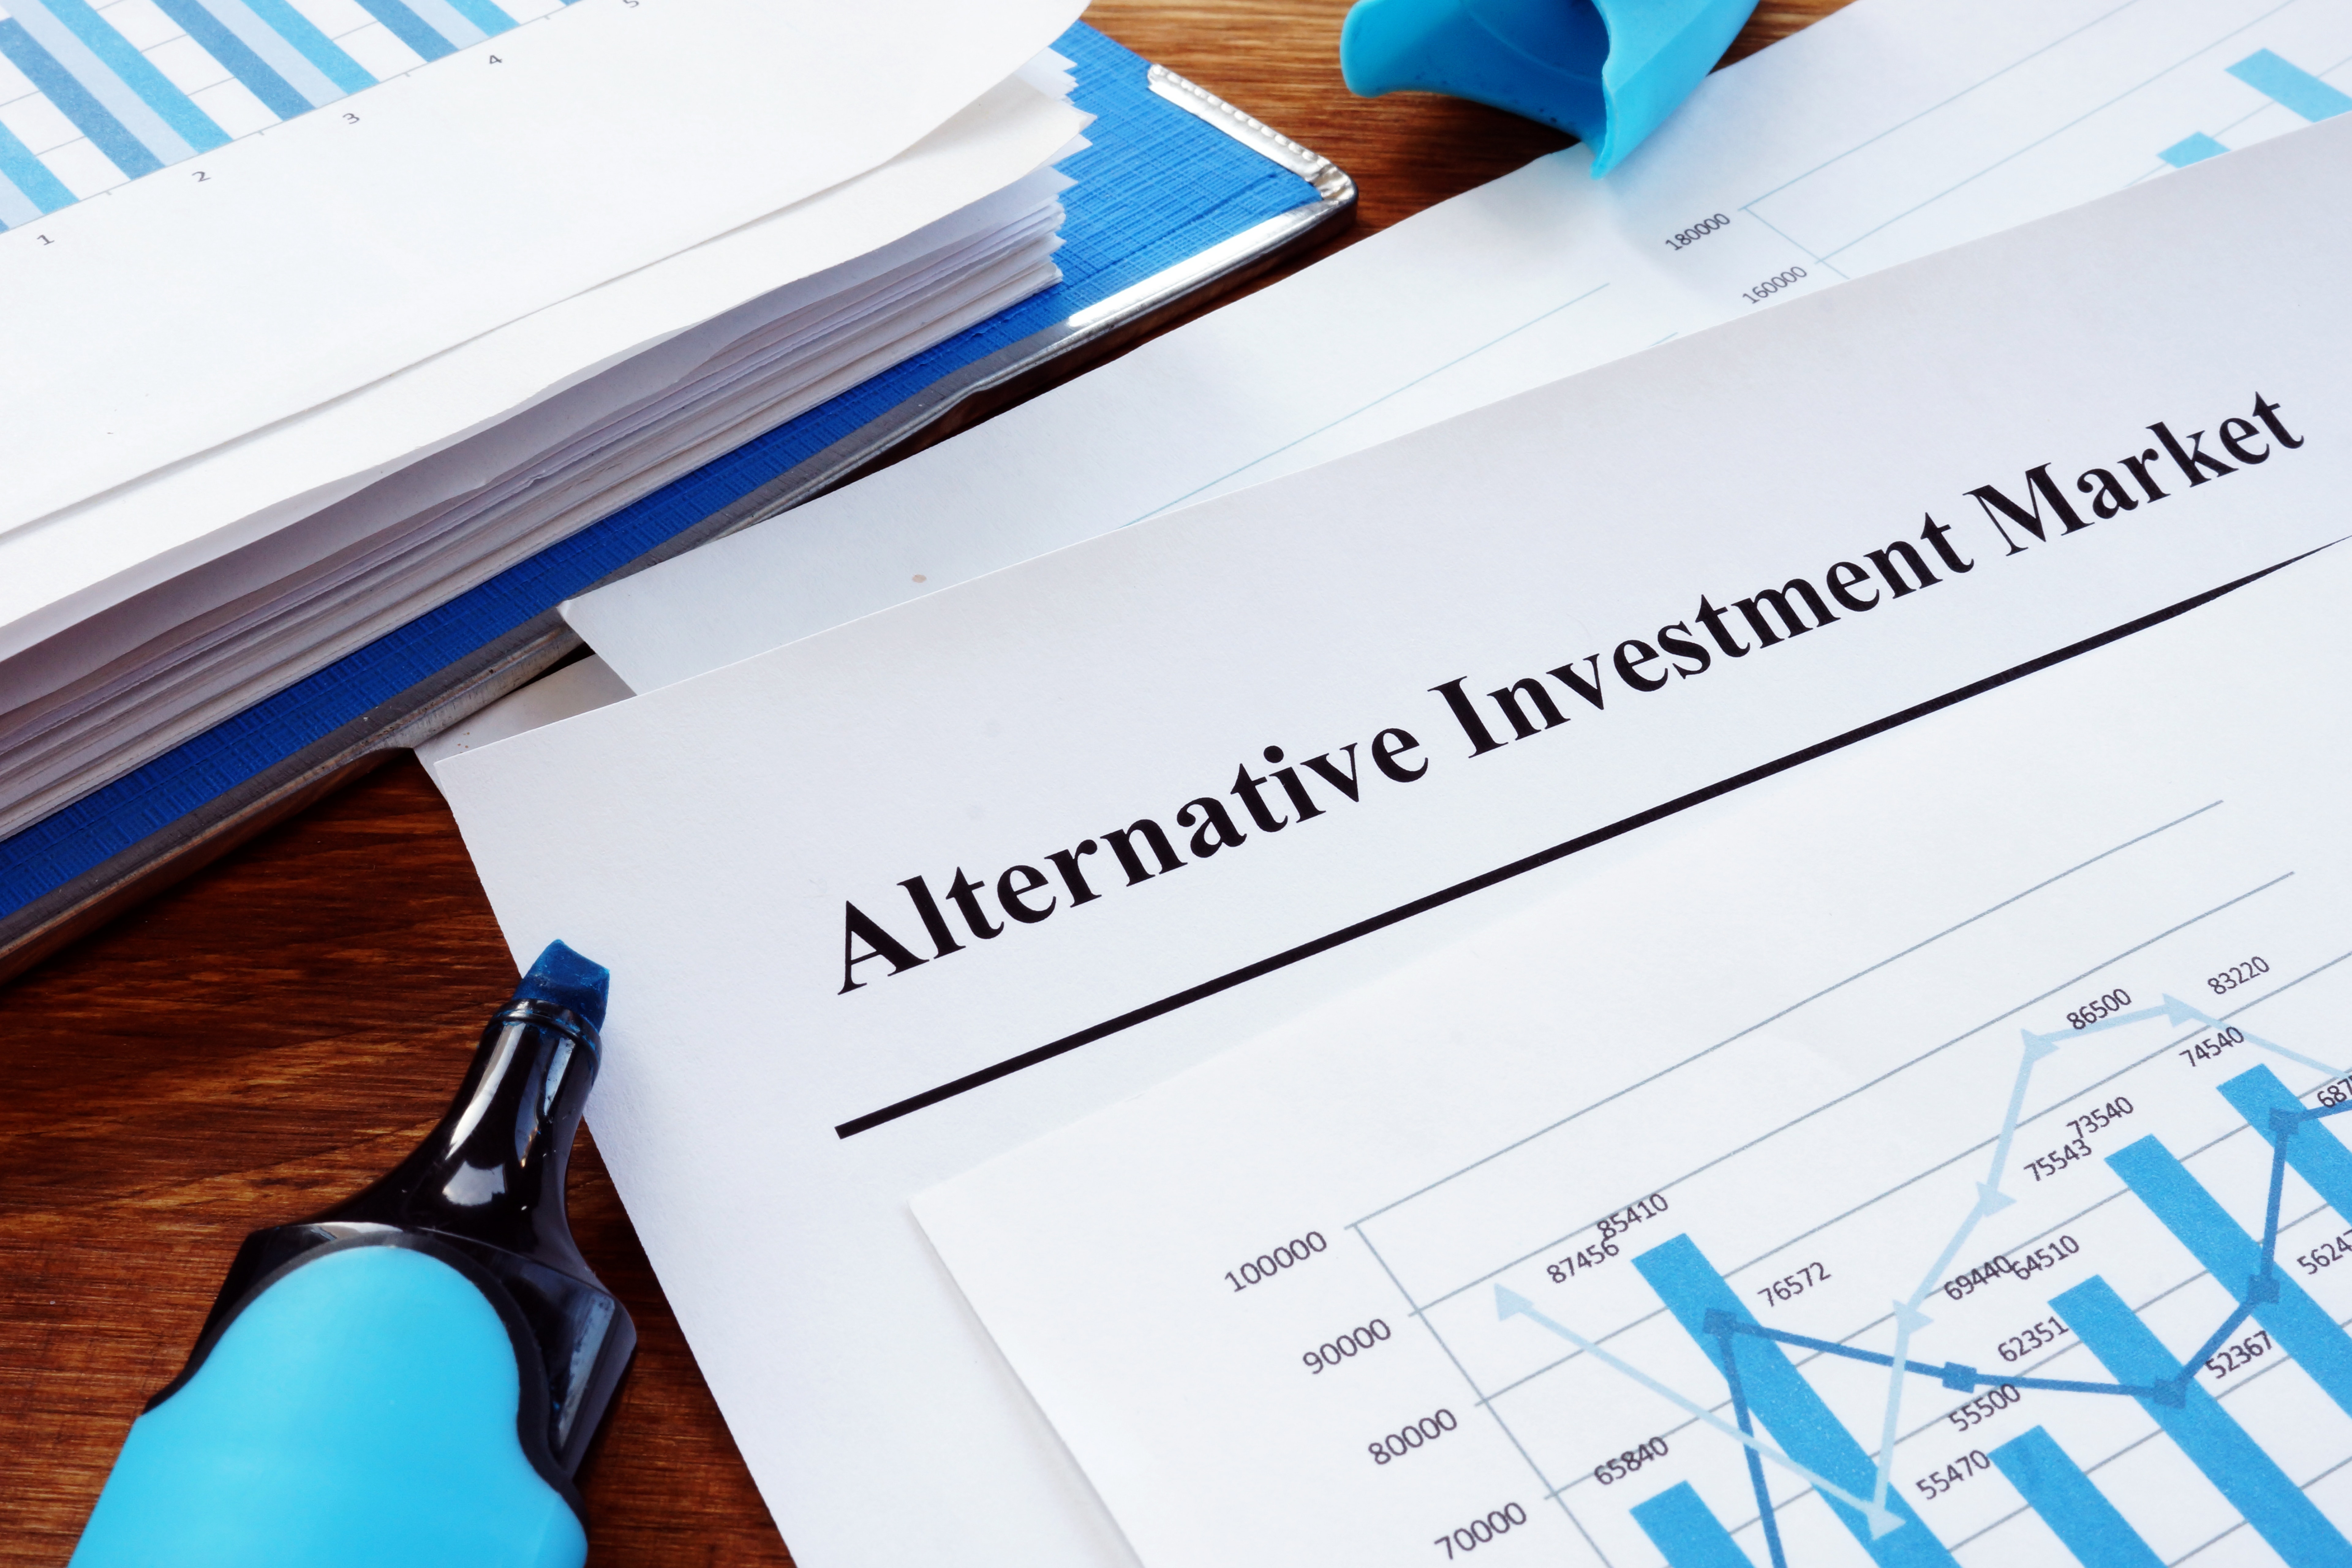 Top ETFs To Gain Access To Alternative Investments